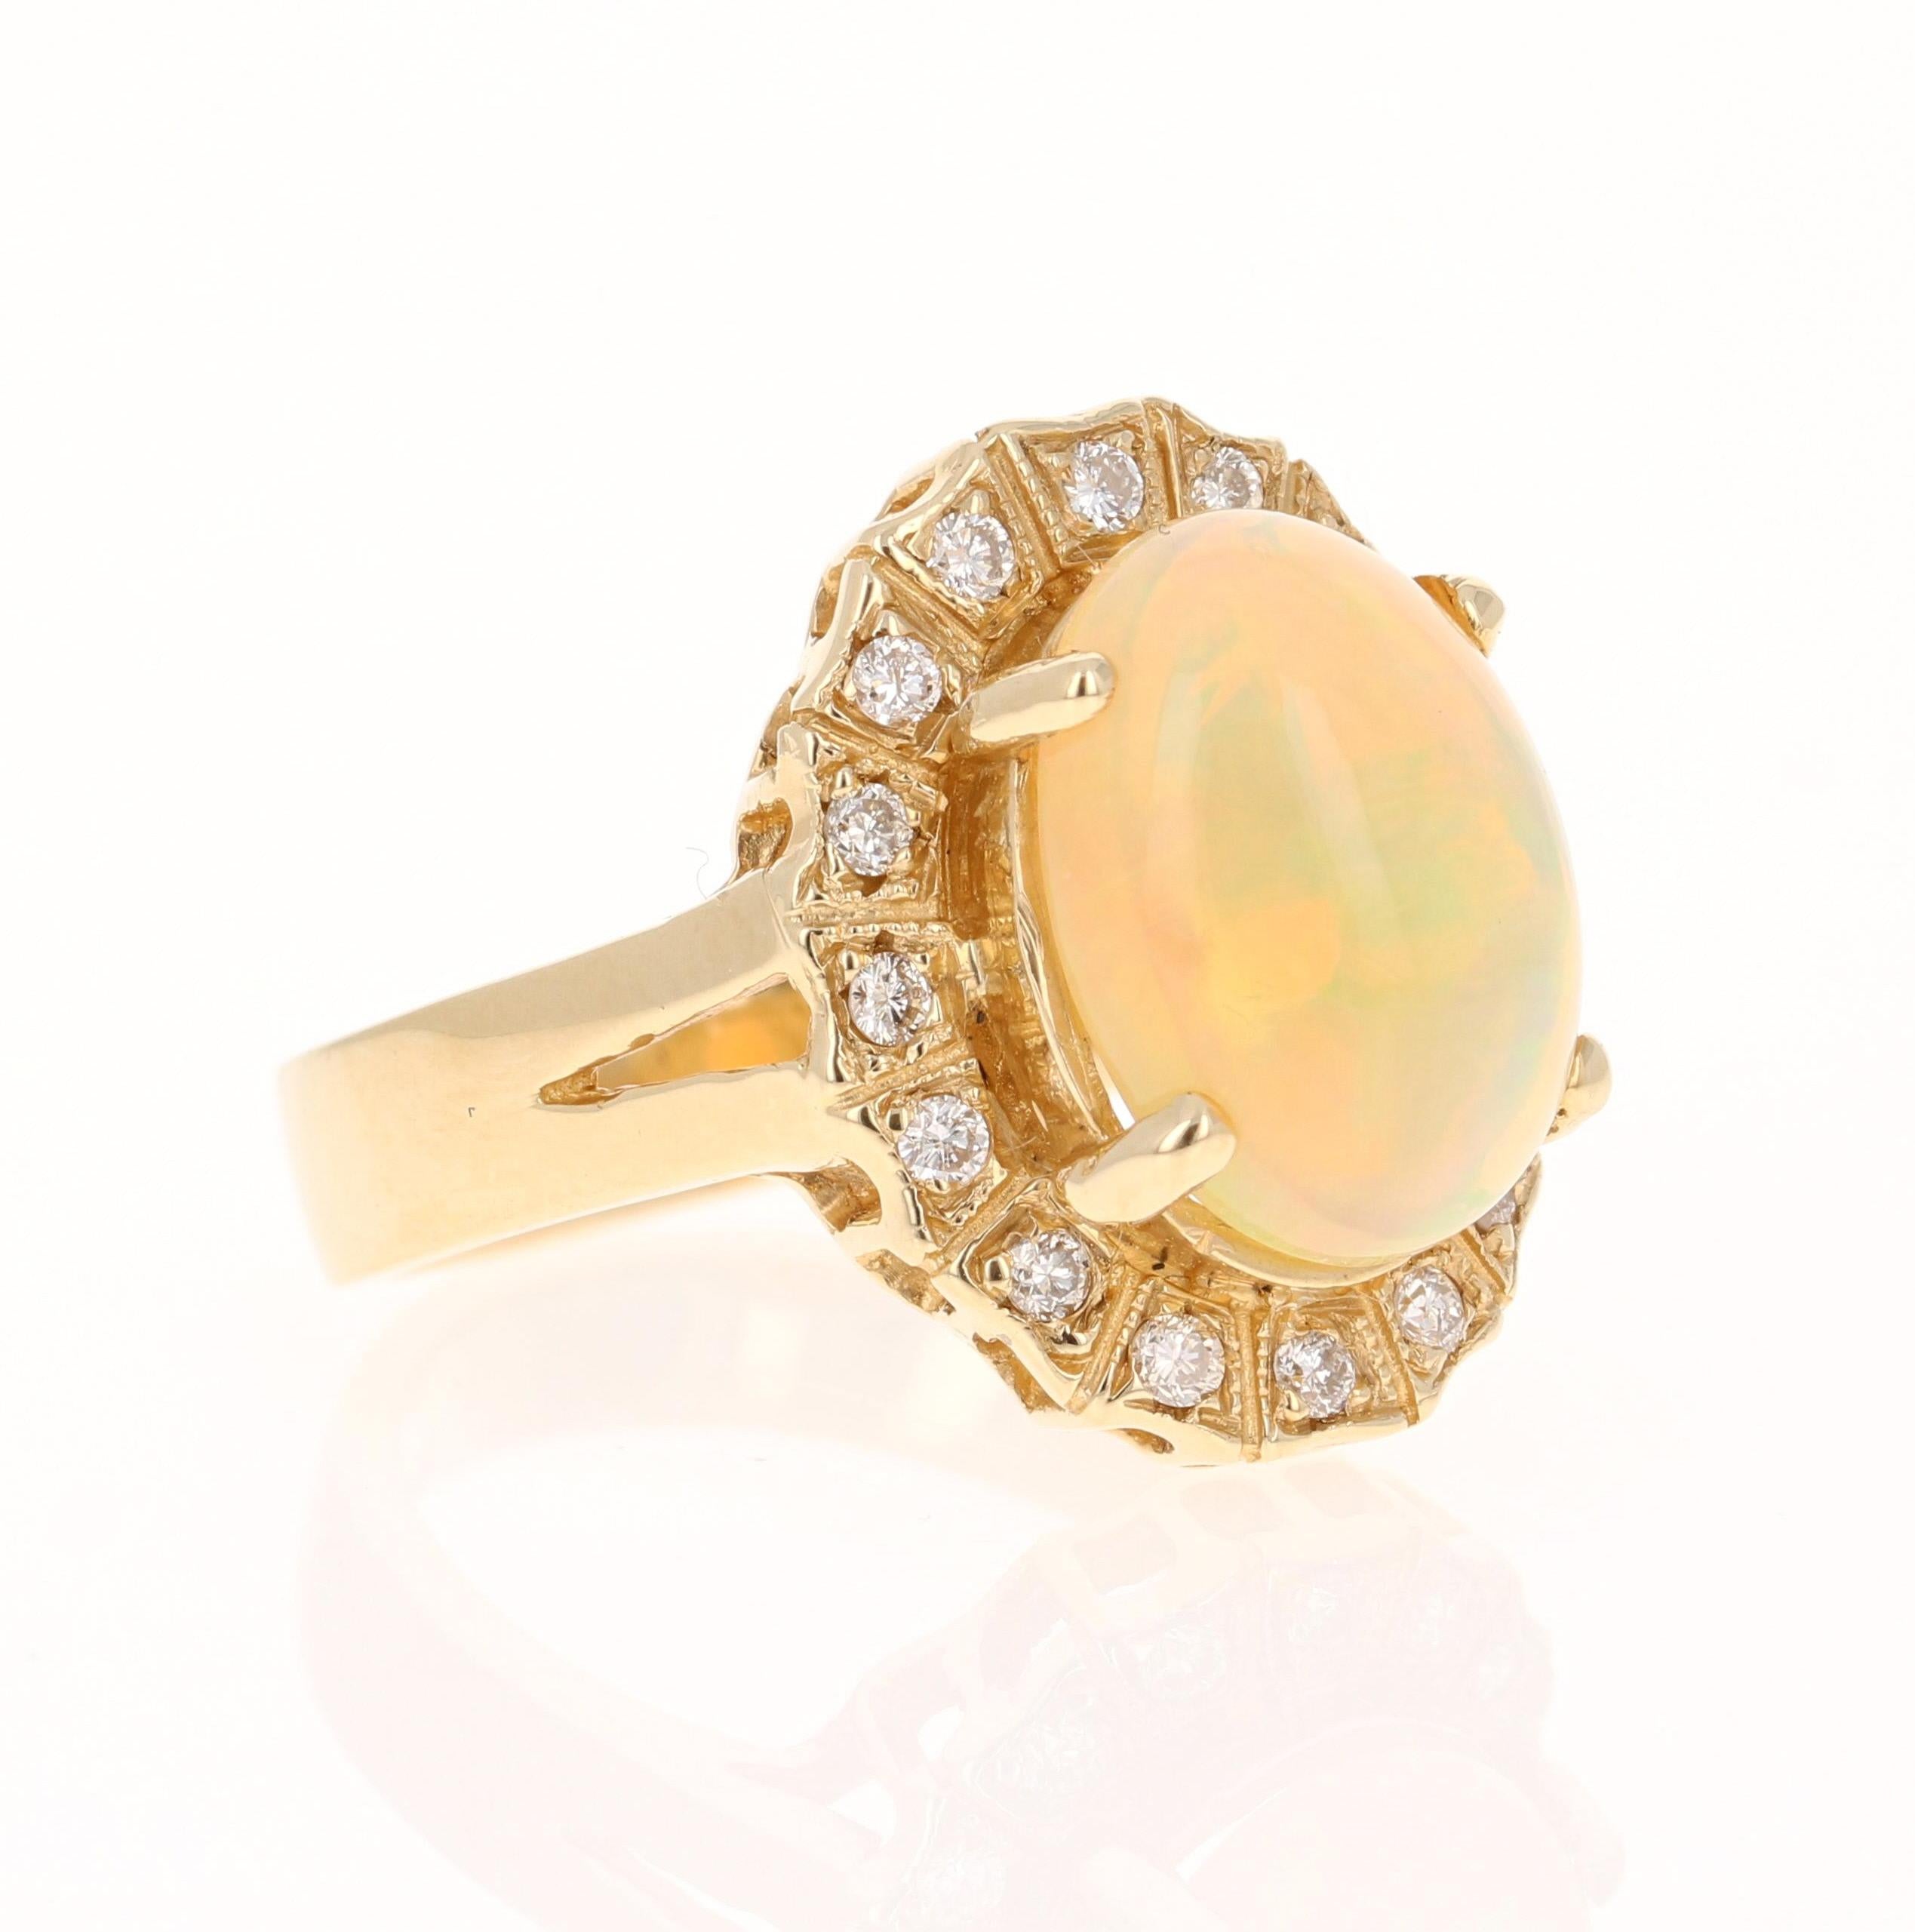 This ring has a 3.36 Carat Opal that is curated in a unique Victorian-Inspired setting. The setting is adorned with 16 Round Cut Diamonds that weigh 0.27 Carats. The total carat weight of the ring is 3.63 Carats.

The Opal displays beautiful flashes